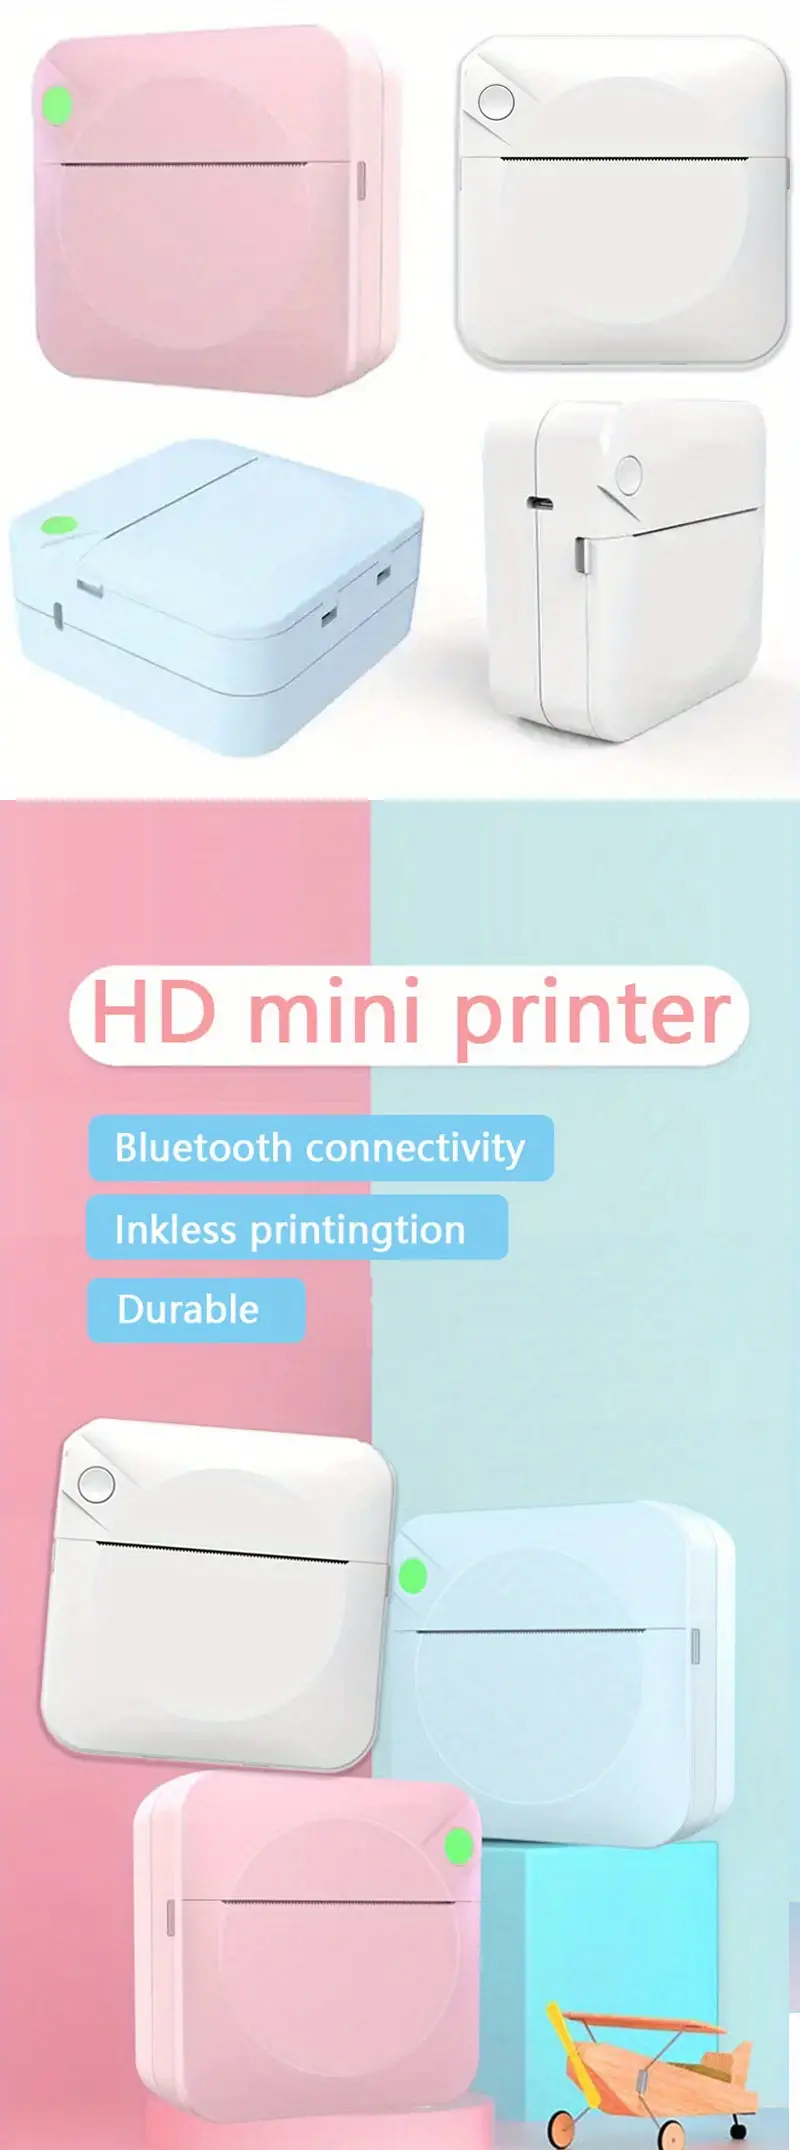 factory direct sales student mini printer bt mobile office staff ink free thermal printer print documents pictures labels materials connect mobile phone bluetooth download app android pink blue and white ink free pocket minicomputer details 1